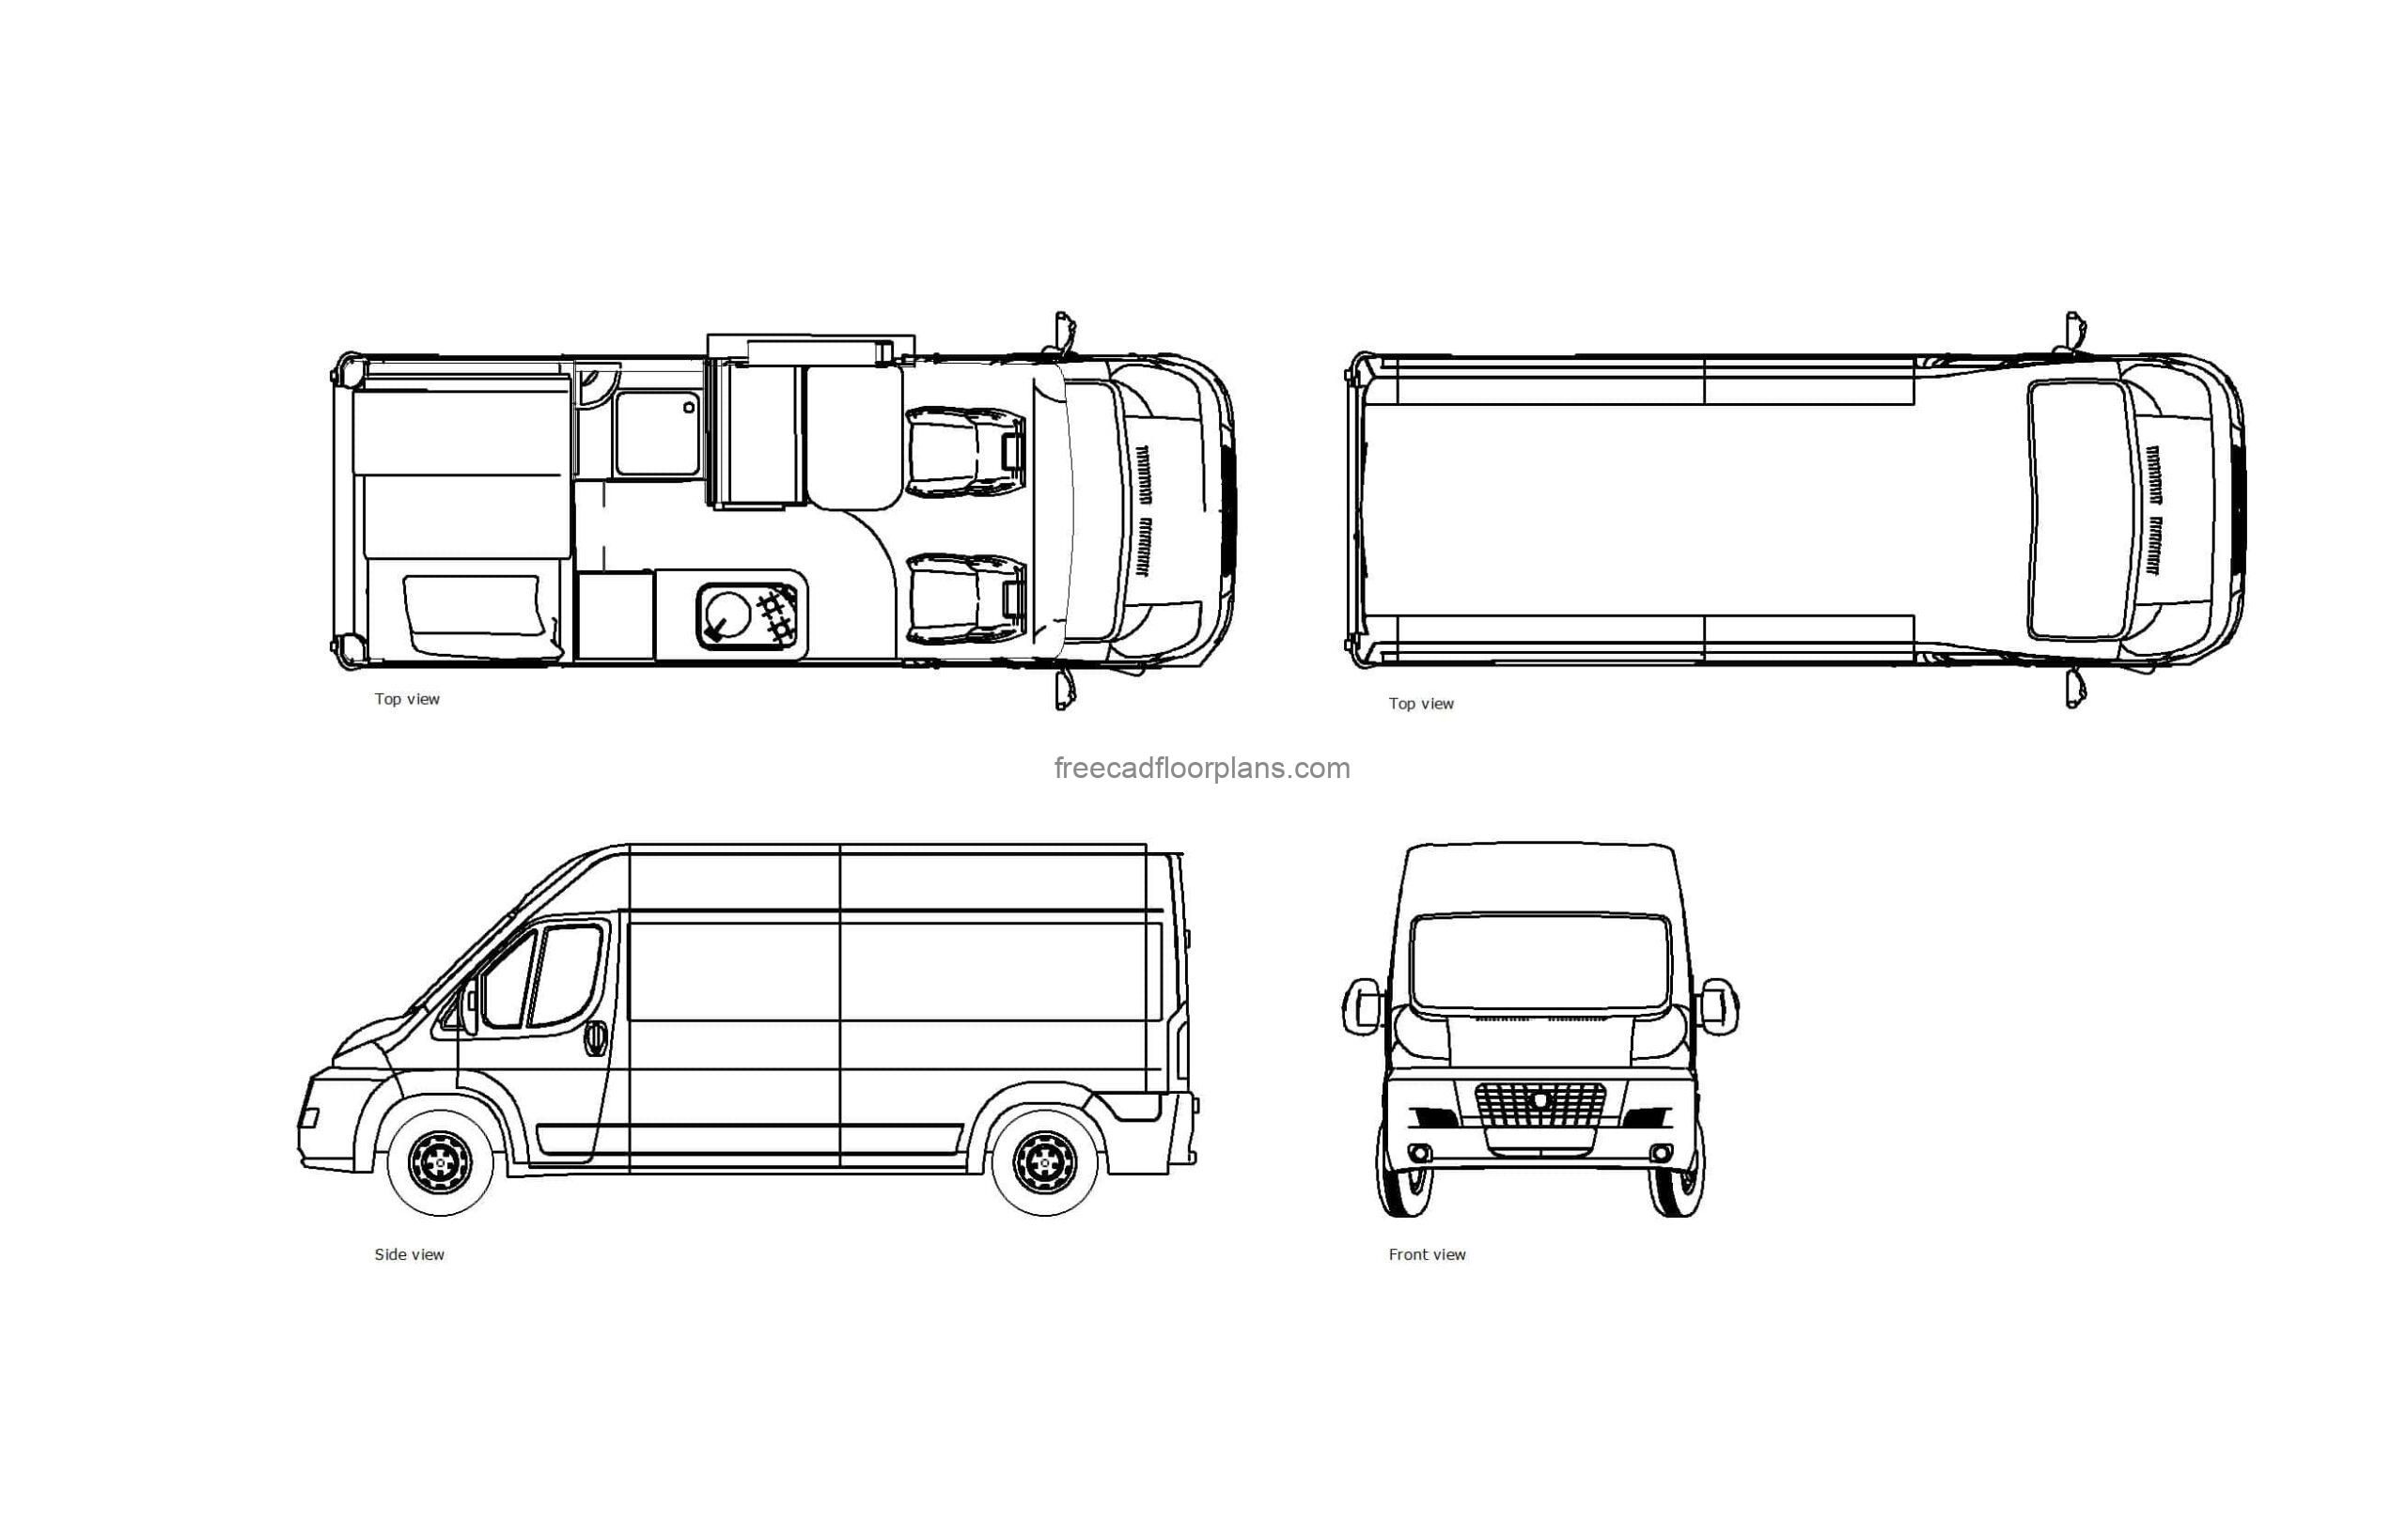 autocad drawing of a motorhome, plan and elevation 2d views, dwg file free for download